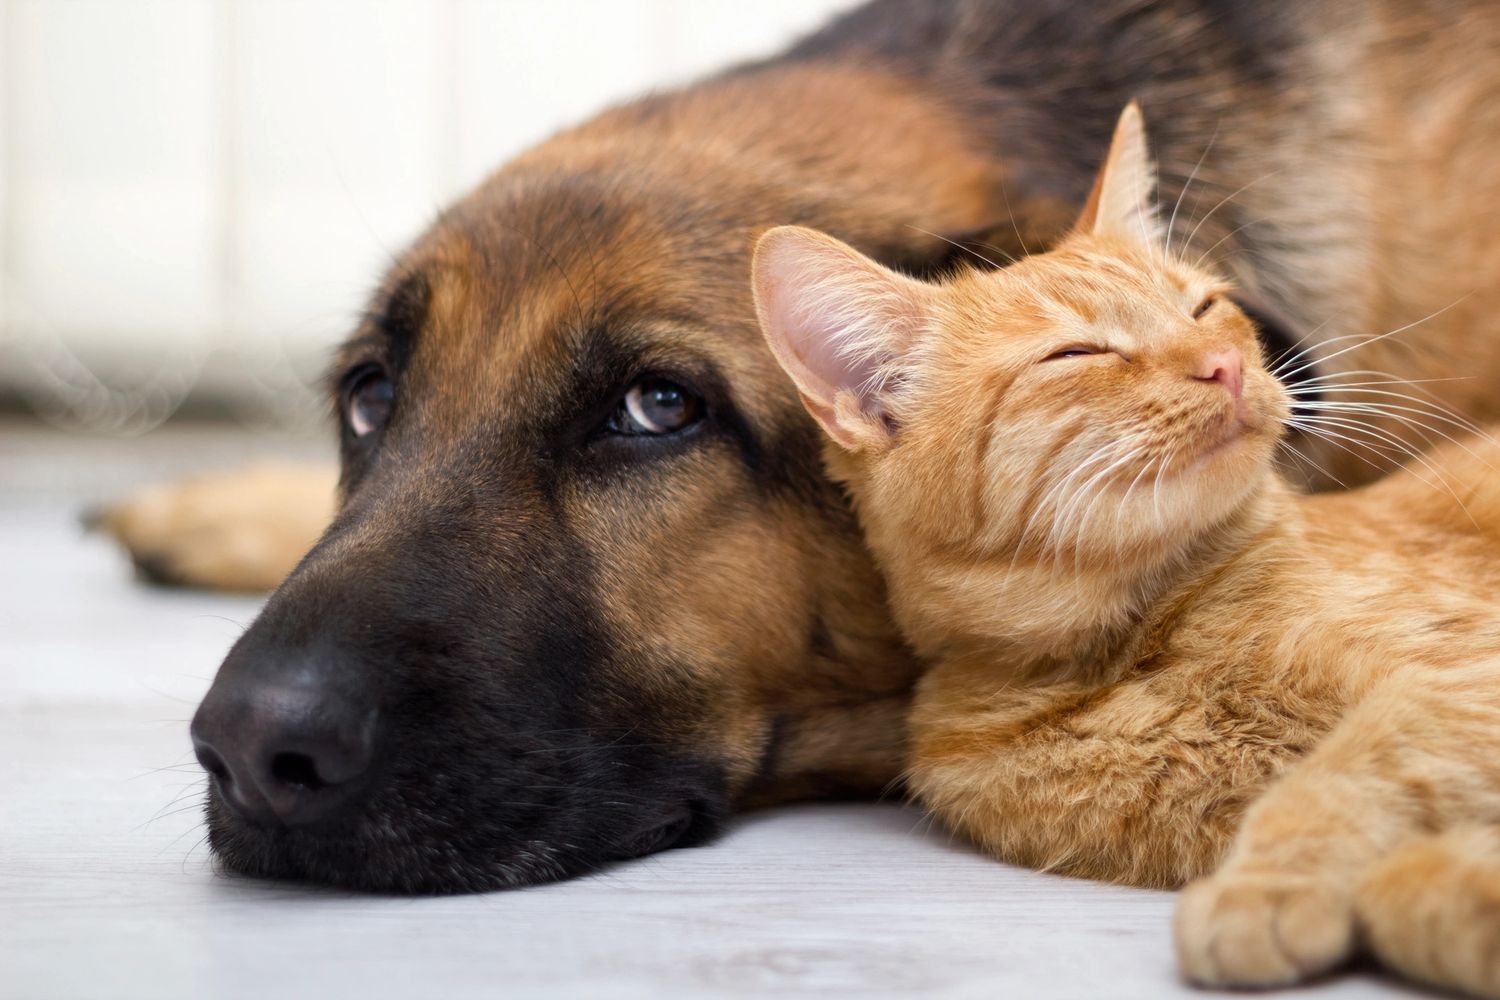 Dog and cat snuggling